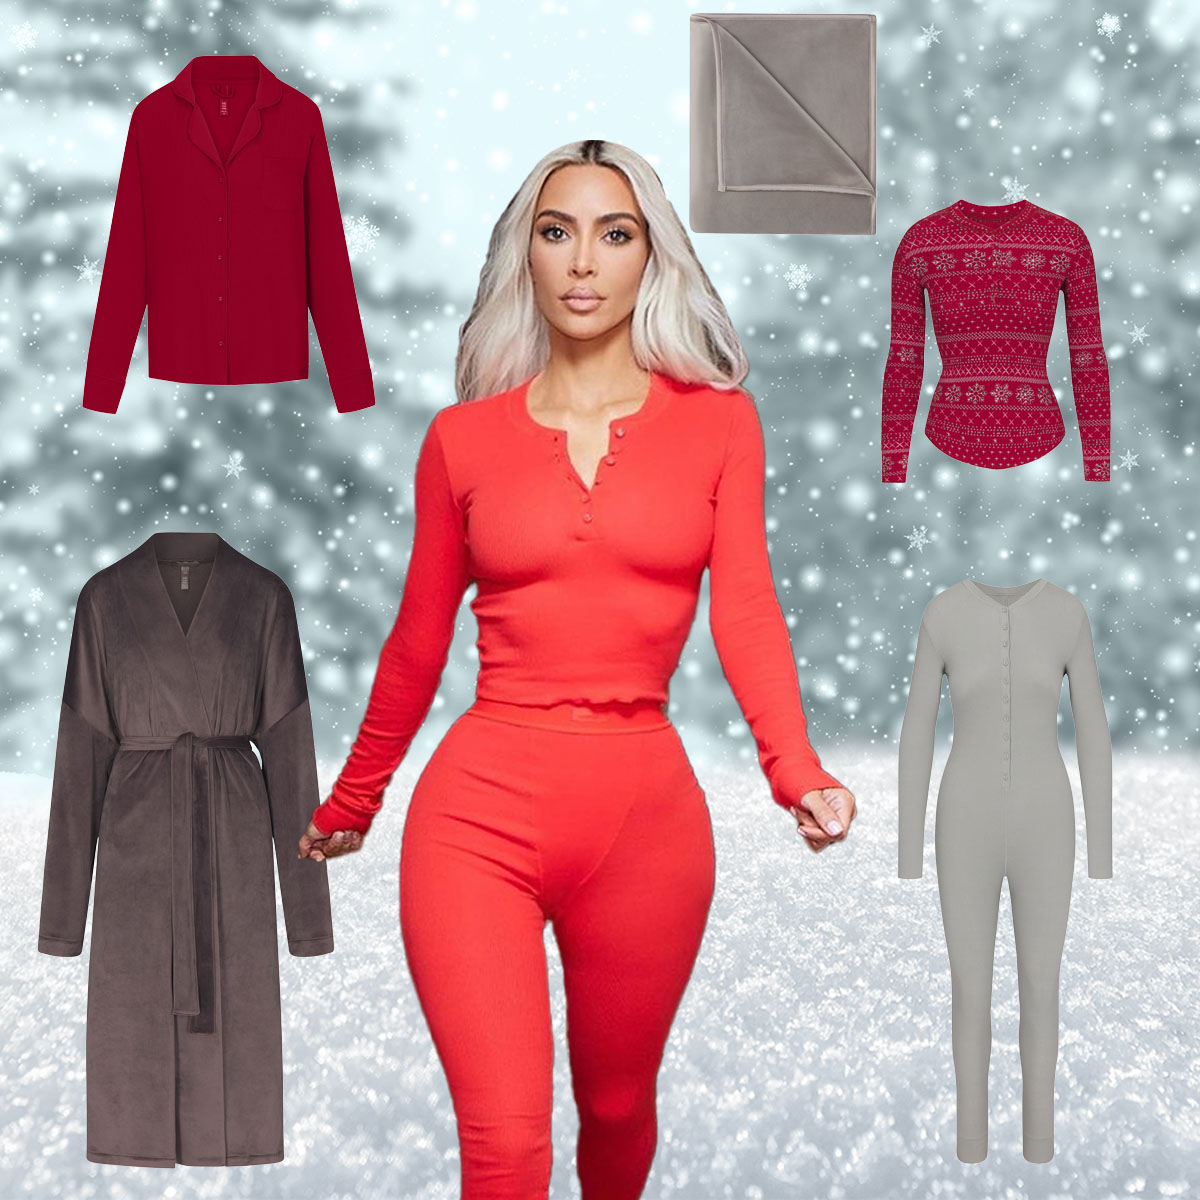 Kim Kardashian on X: Looking for a last-minute, easy gift? @SKIMS